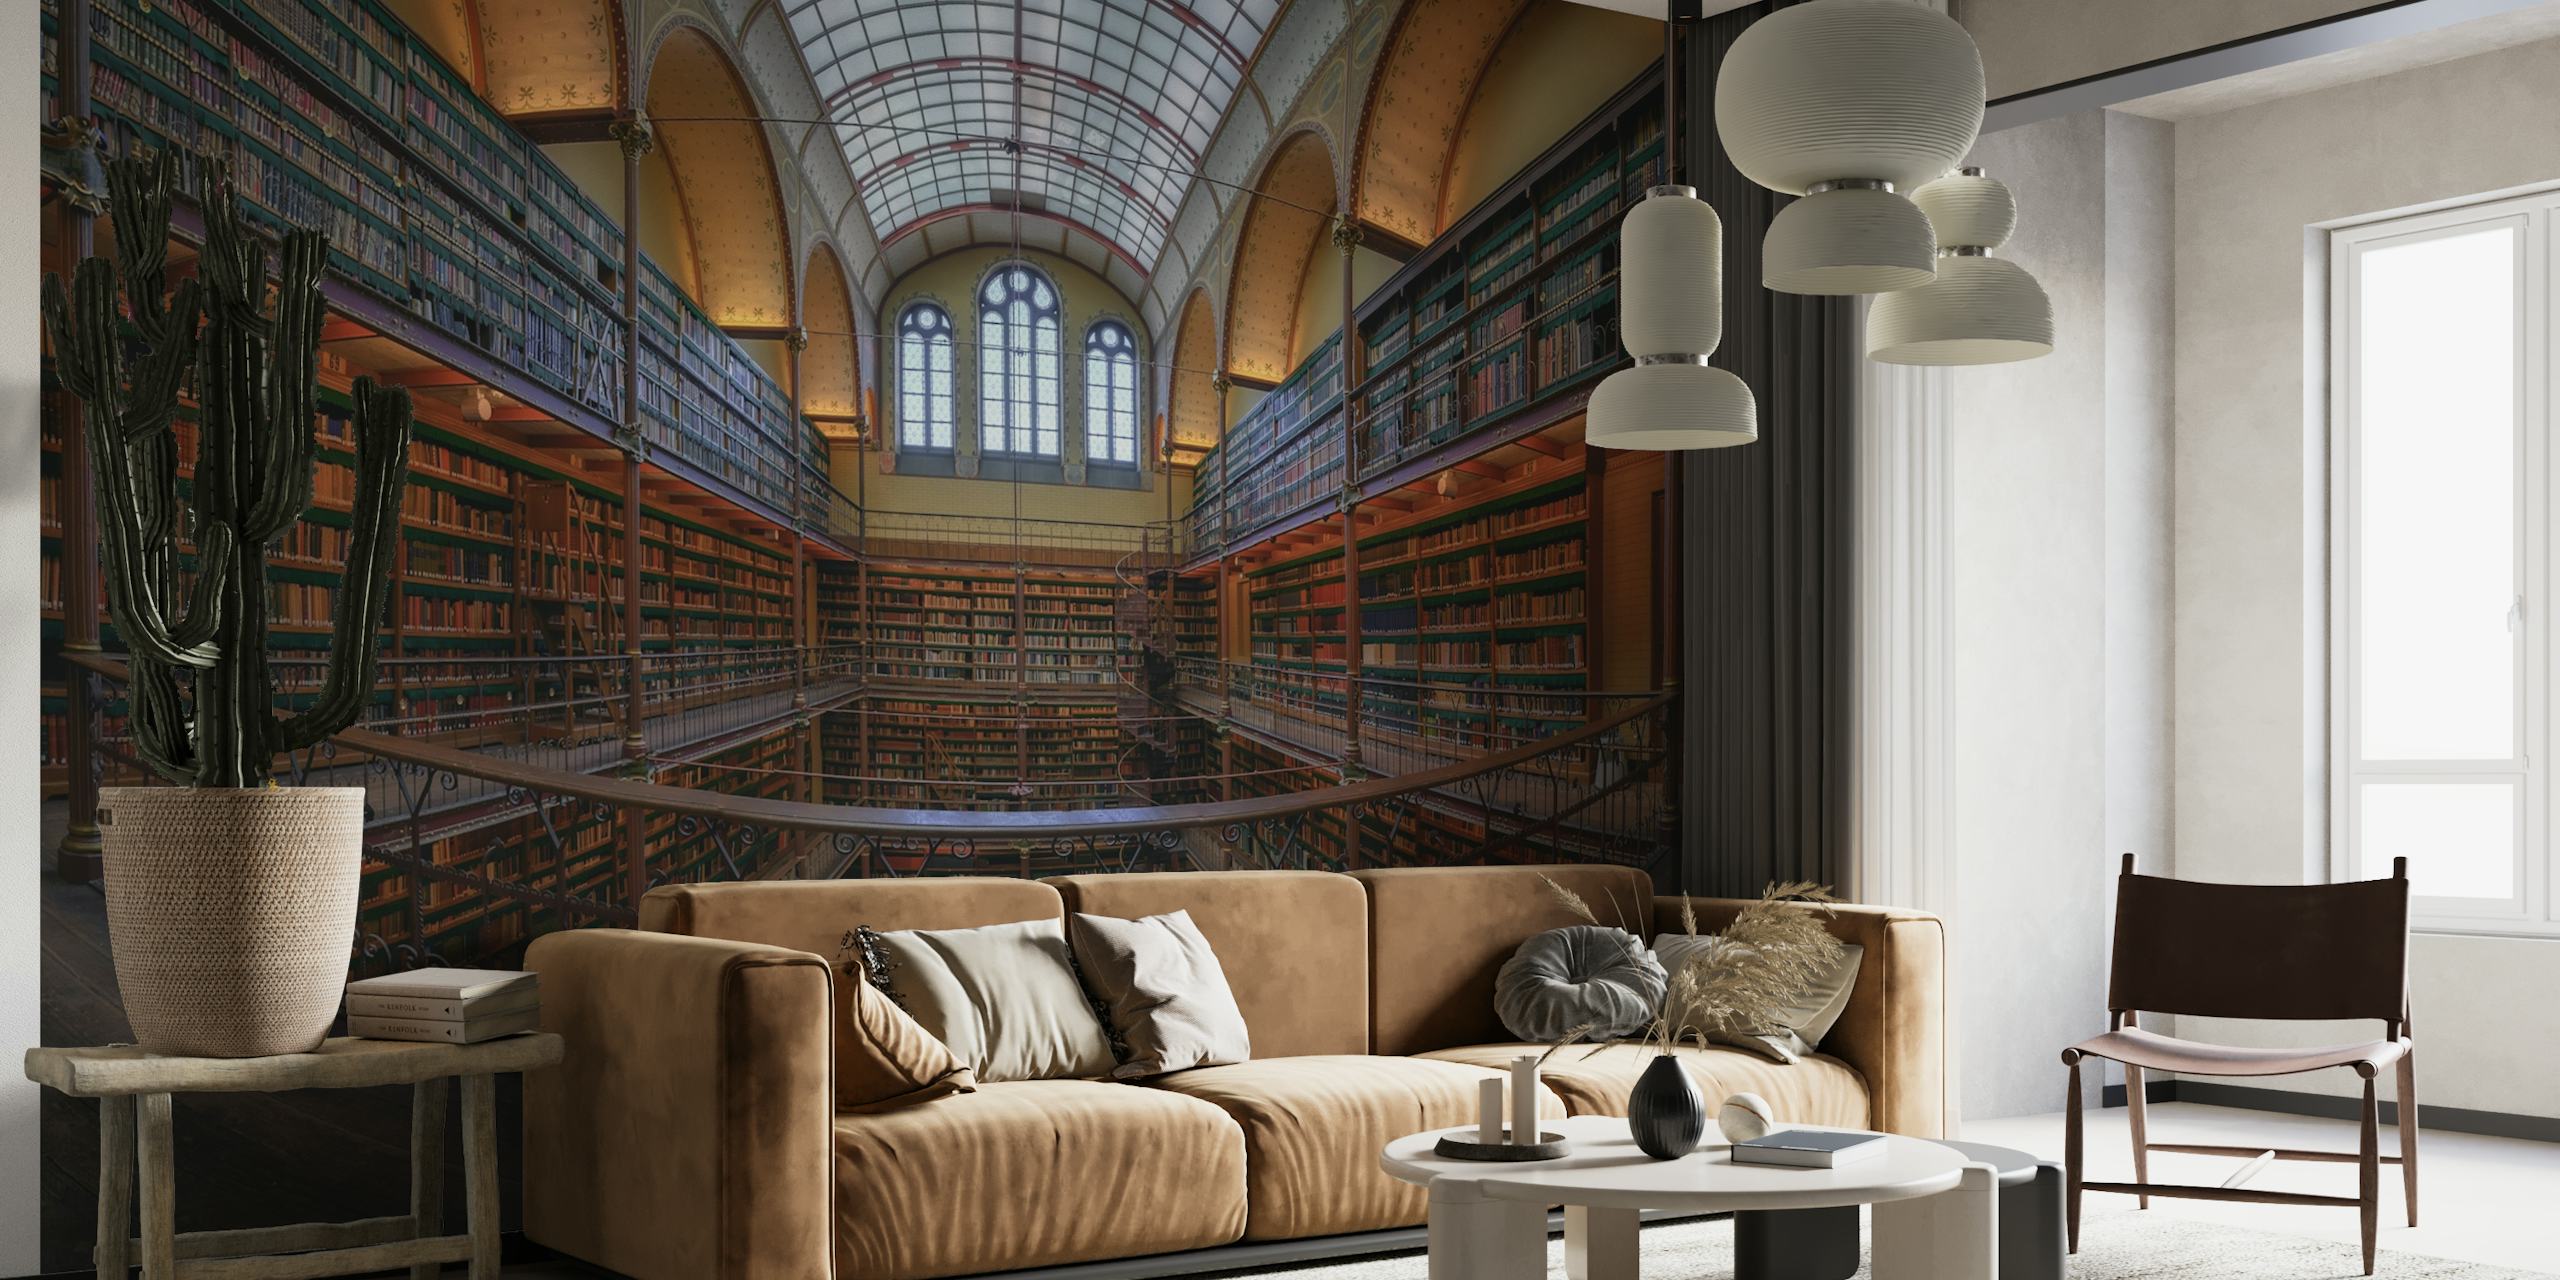 The Cuypers Library papel pintado